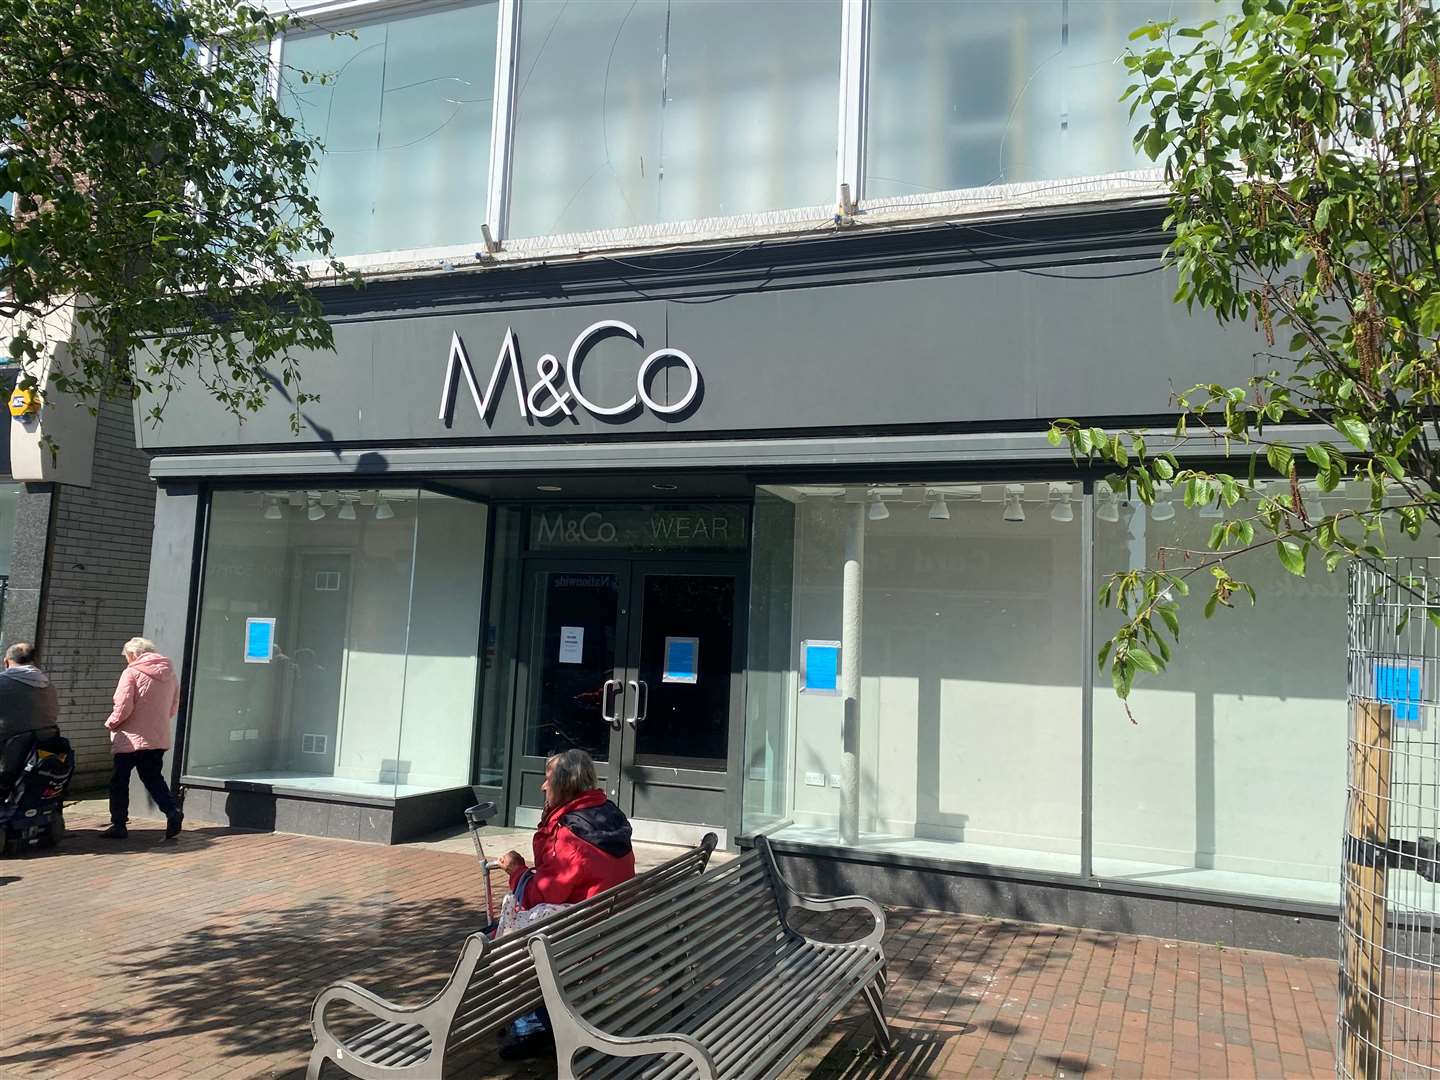 The former M&Co shop in Deal High Street is set to become a Lounge bar